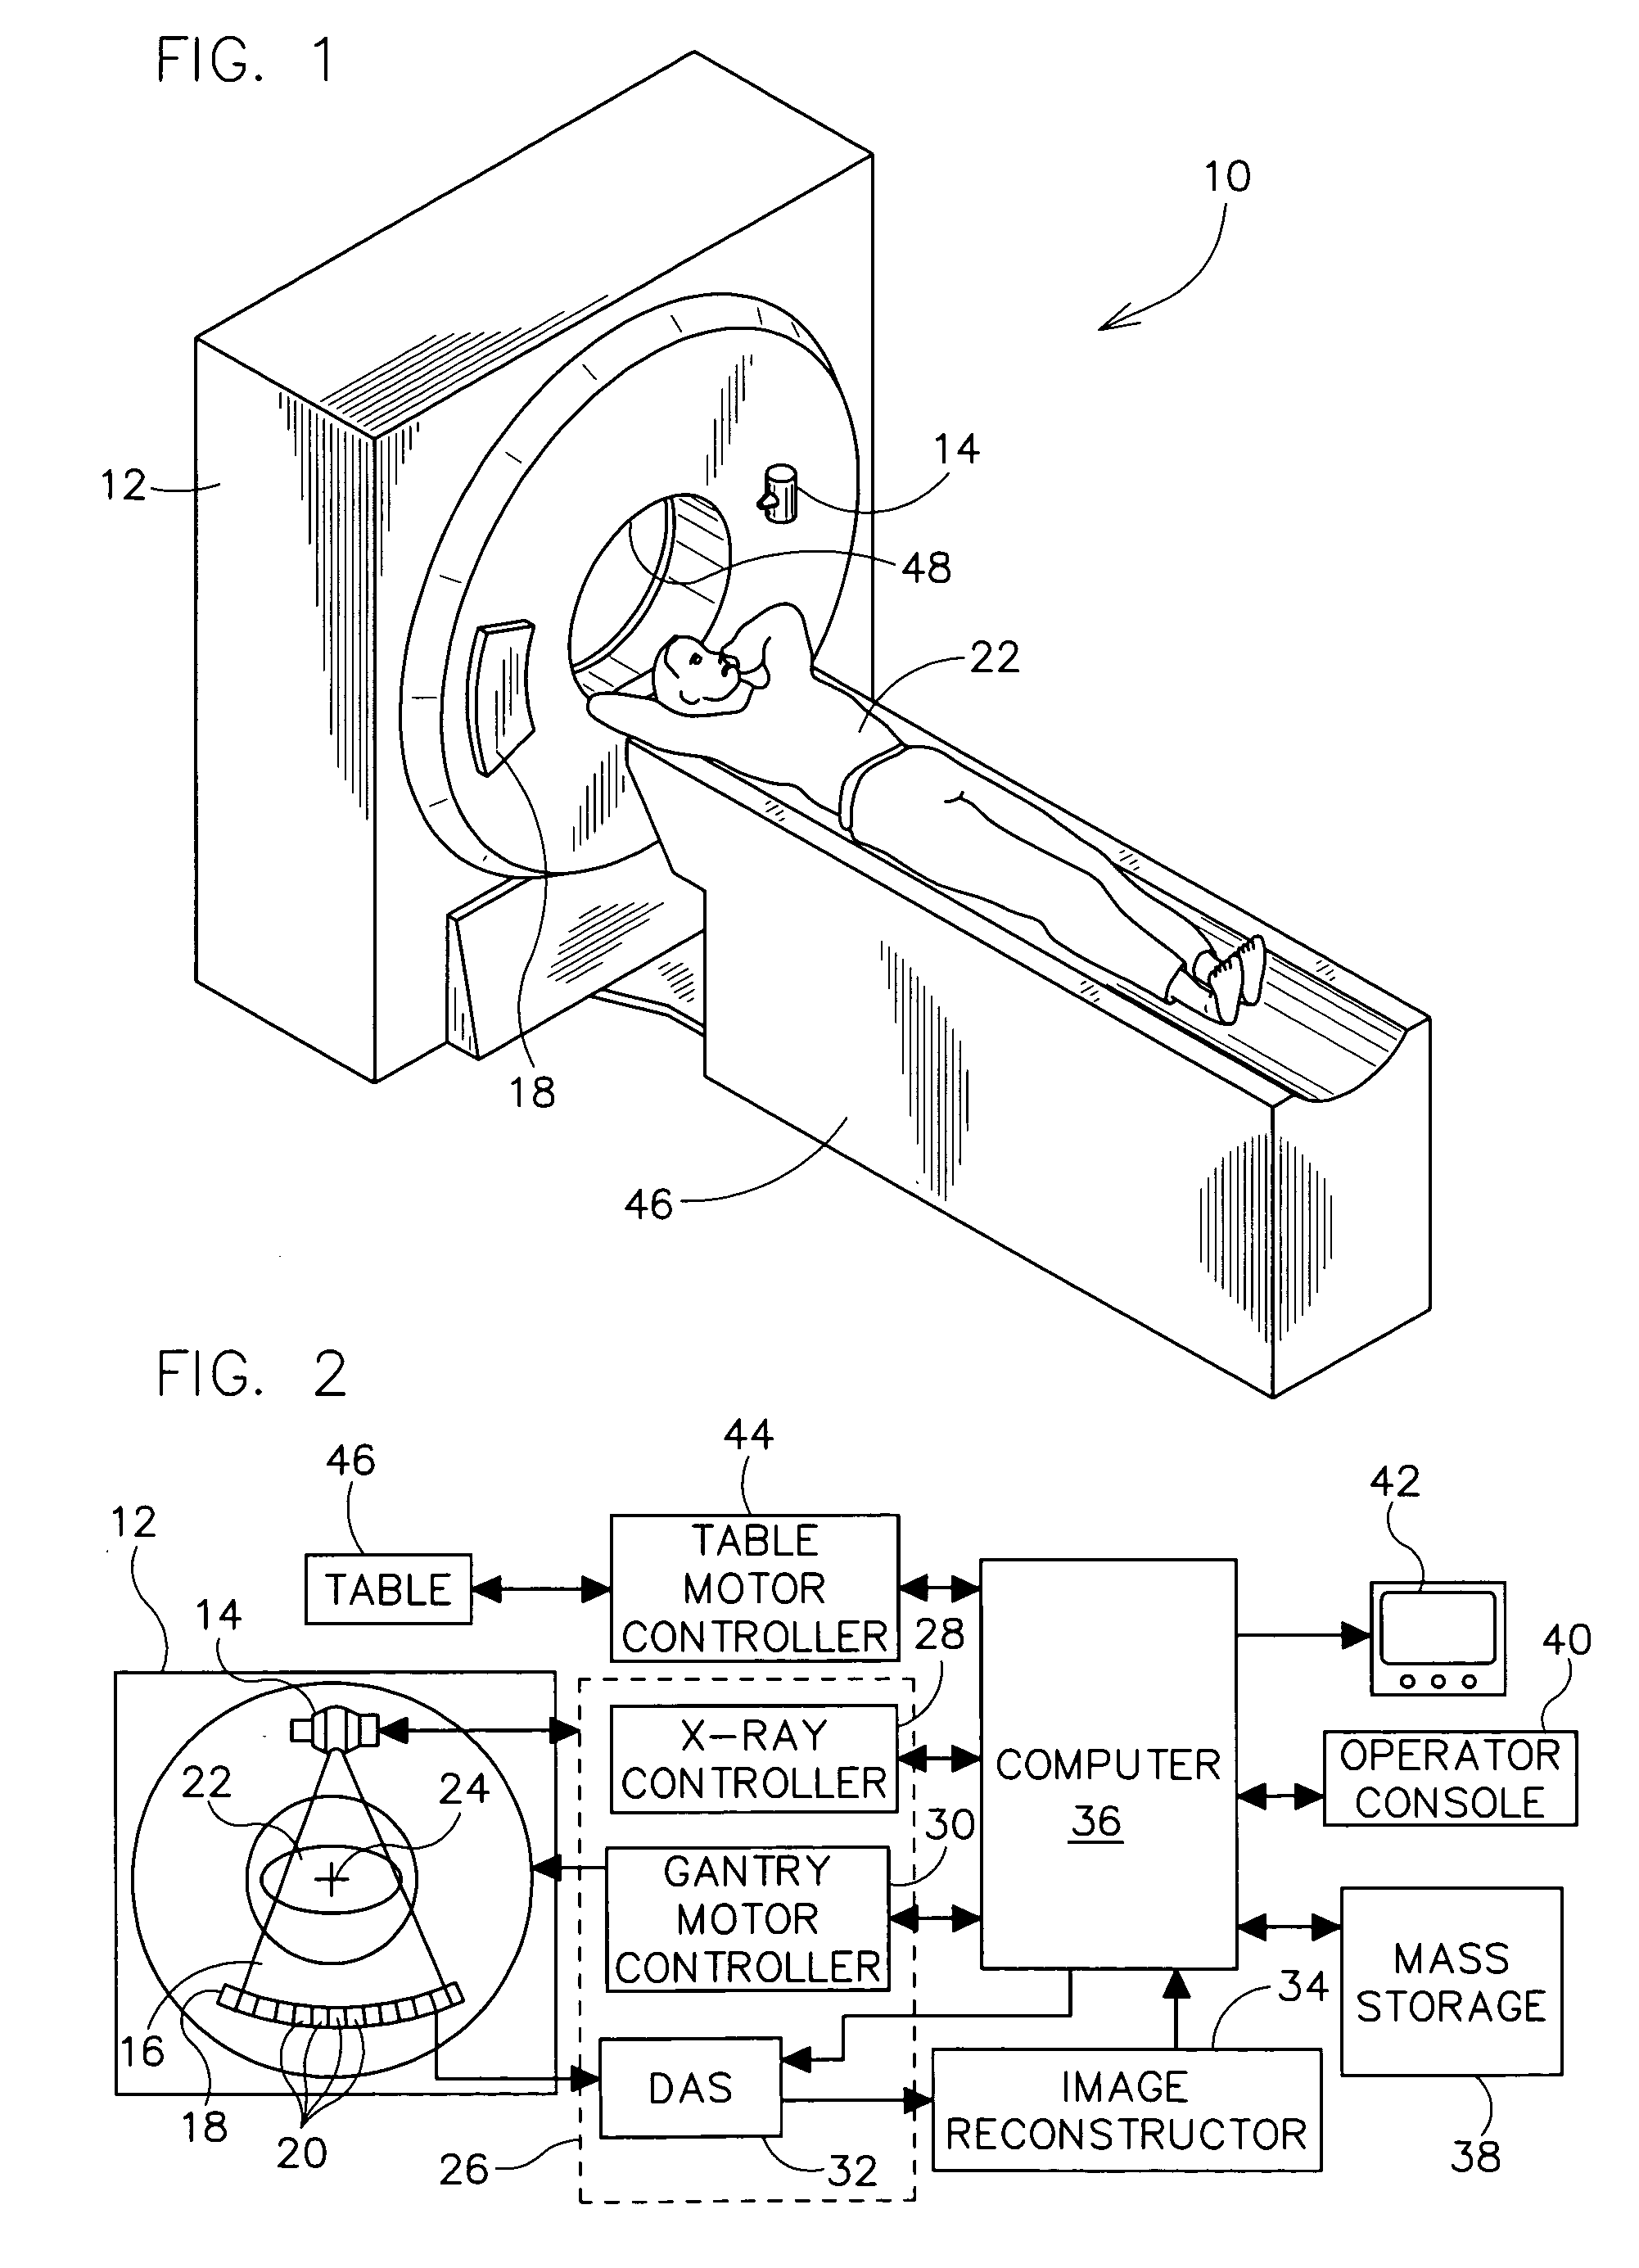 Self regulating detector rail heater for computed tomography imaging systems